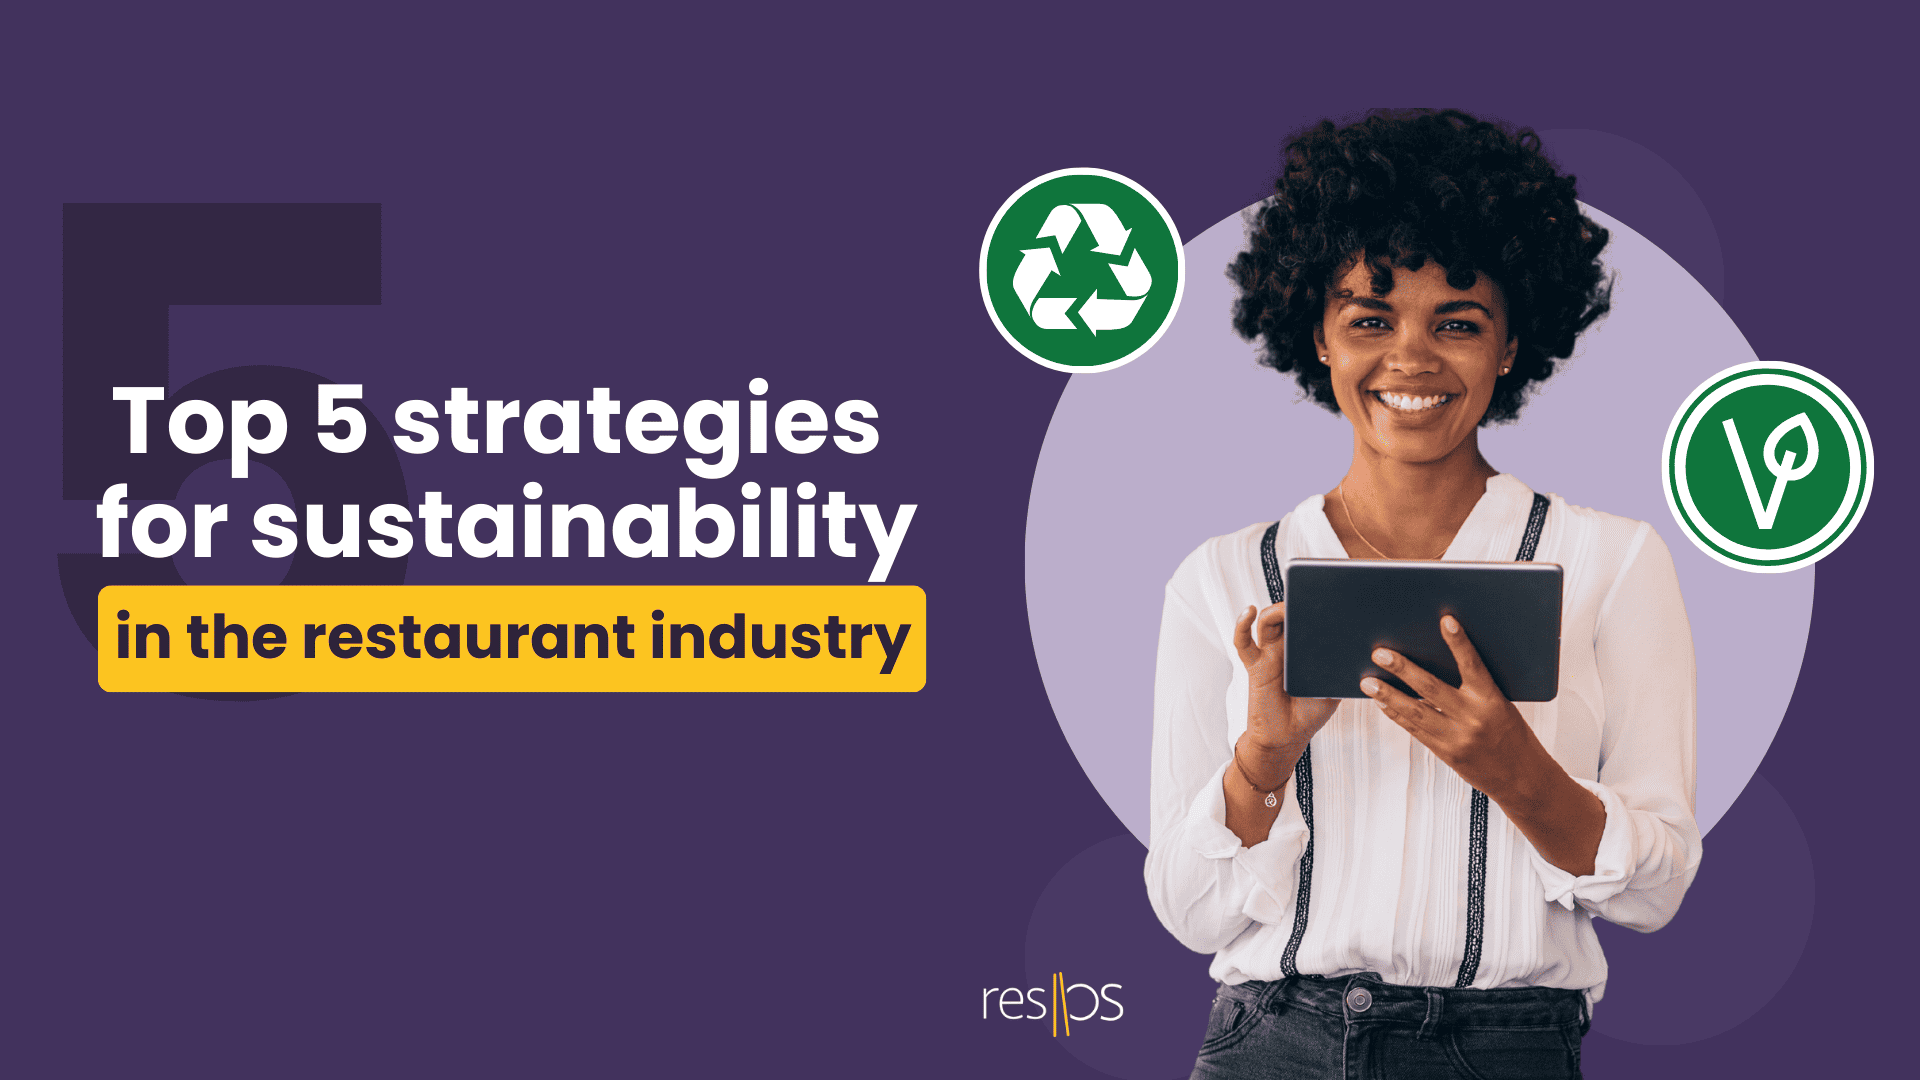 Top 5 strategies for sustainability in the restaurant industry